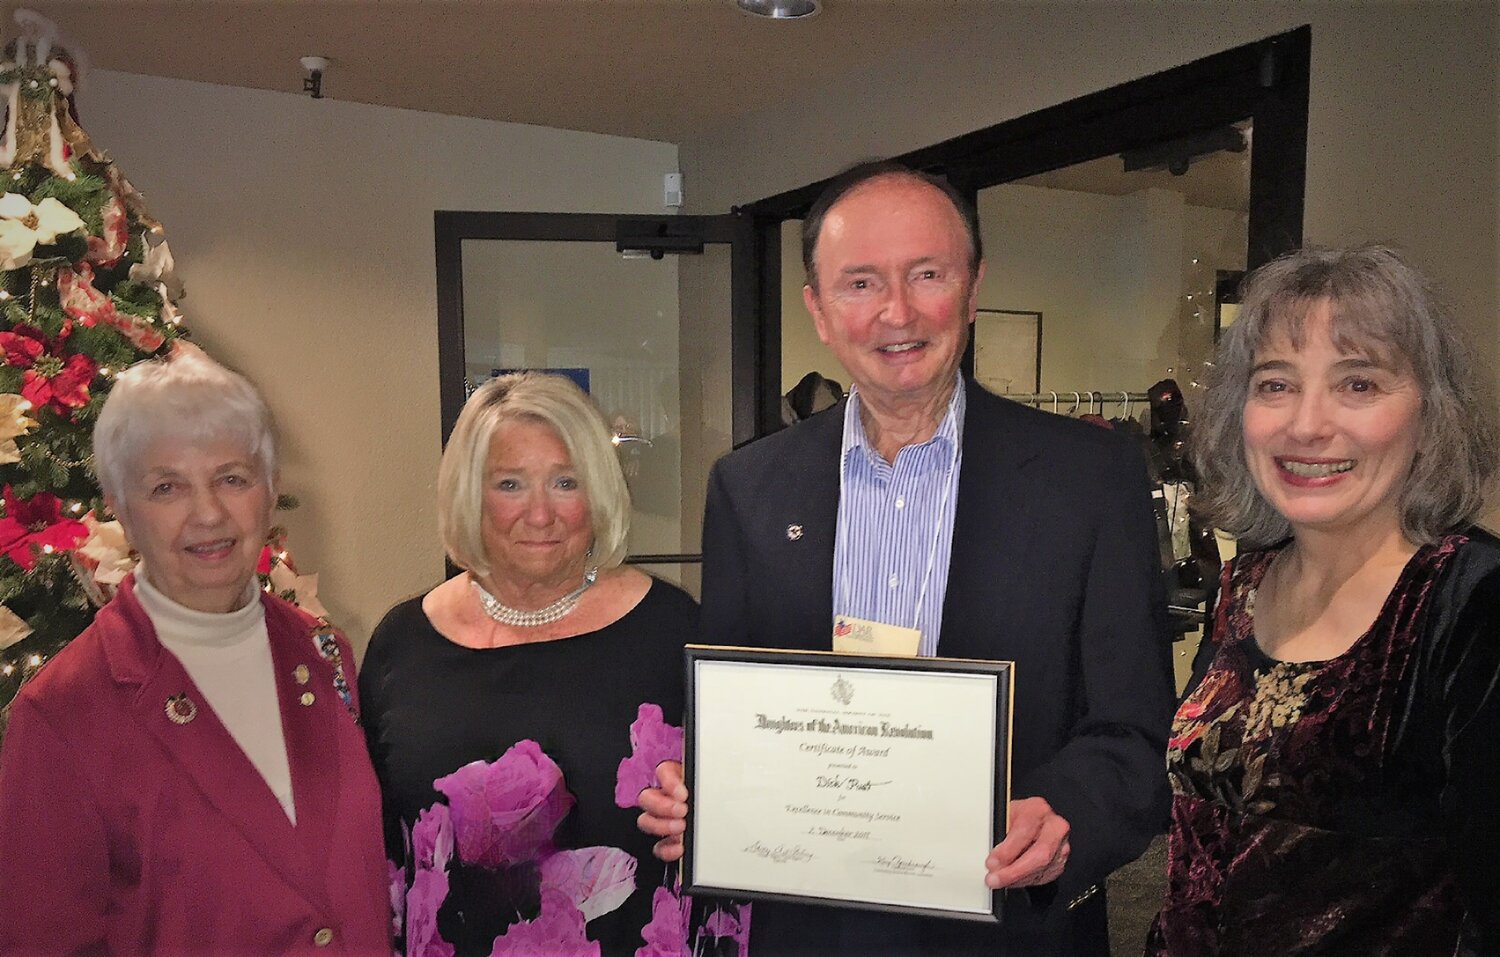 Dick Pust has received hundreds of awards and “thank you” letters for his contribution at the station and throughout the community, including special recognition from the Congress of the United States. In 2017, Della Stenstrom and I had the pleasure of awarding Dick with the Community Service Award, issued by the Sacajawea Chapter Daughters of the American Revolution. Pictured: Della Stenstrom, Dick’s wife Pam Pust, Dick Pust, and Shirley Stirling.